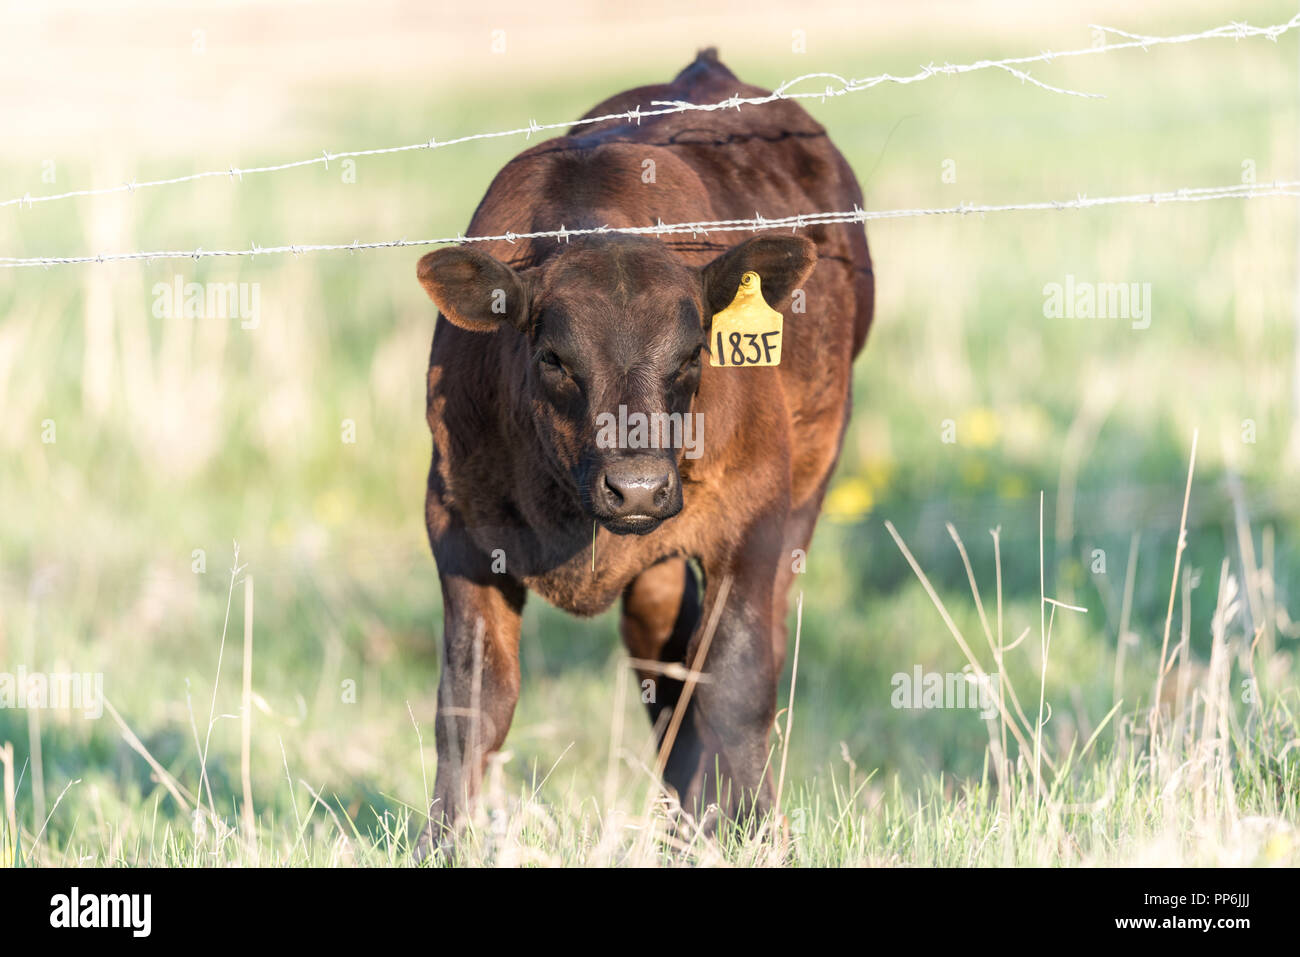 Young livestock beef cattle behind a barbed wire fence in a Rural pasture in the prairies of Alberta Canada Stock Photo